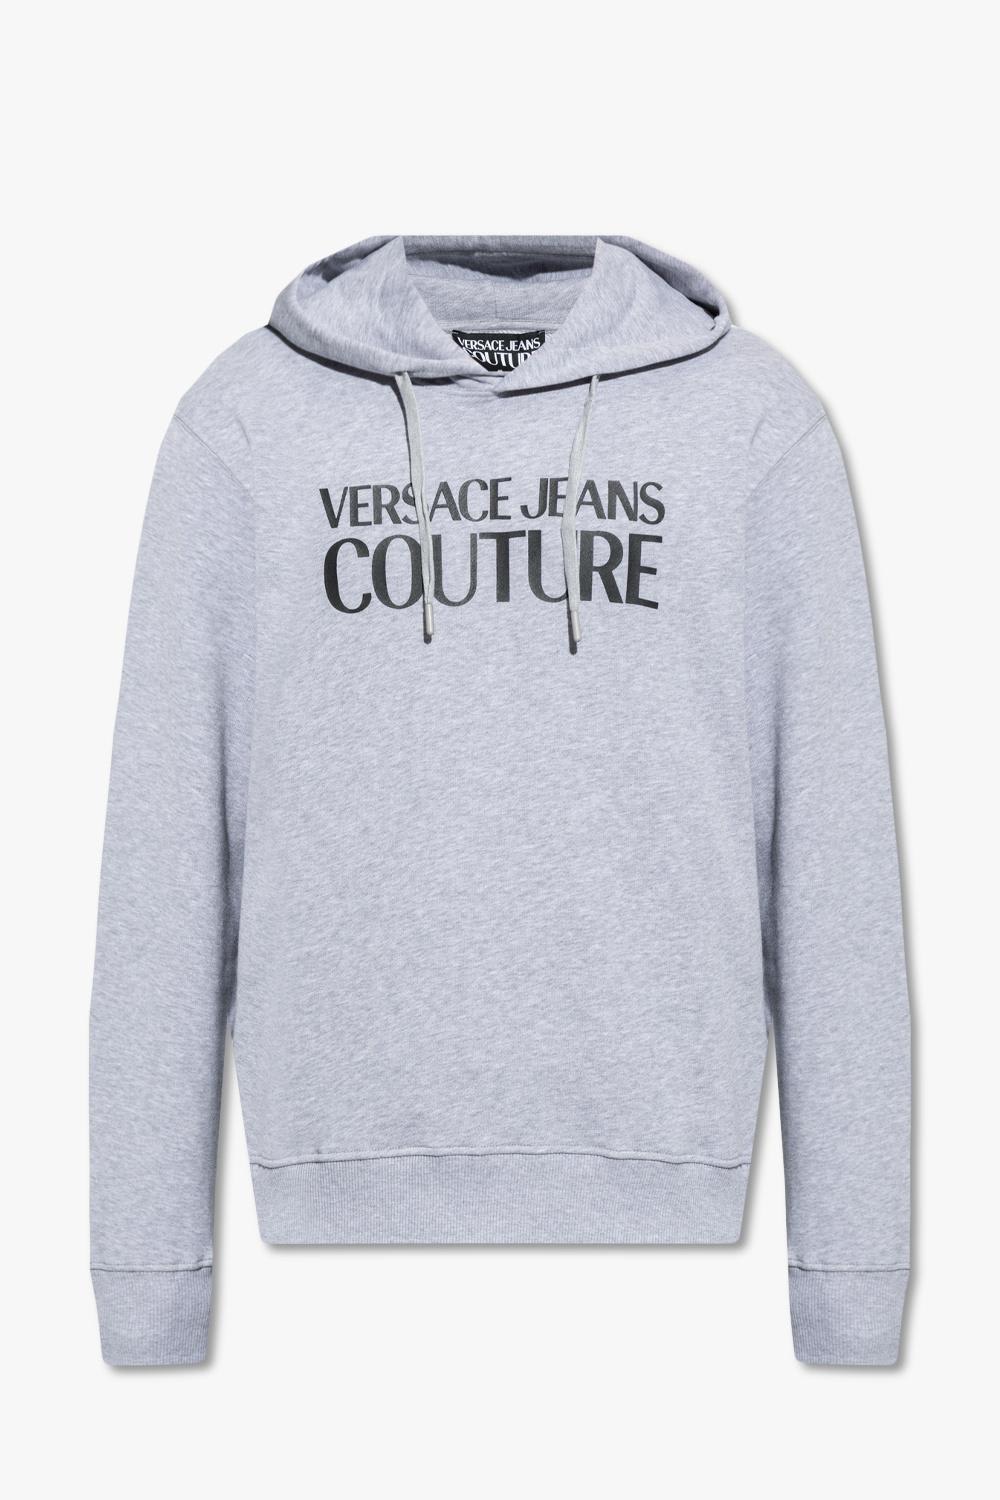 VERSACE JEANS COUTURE HOODIE WITH LOGO